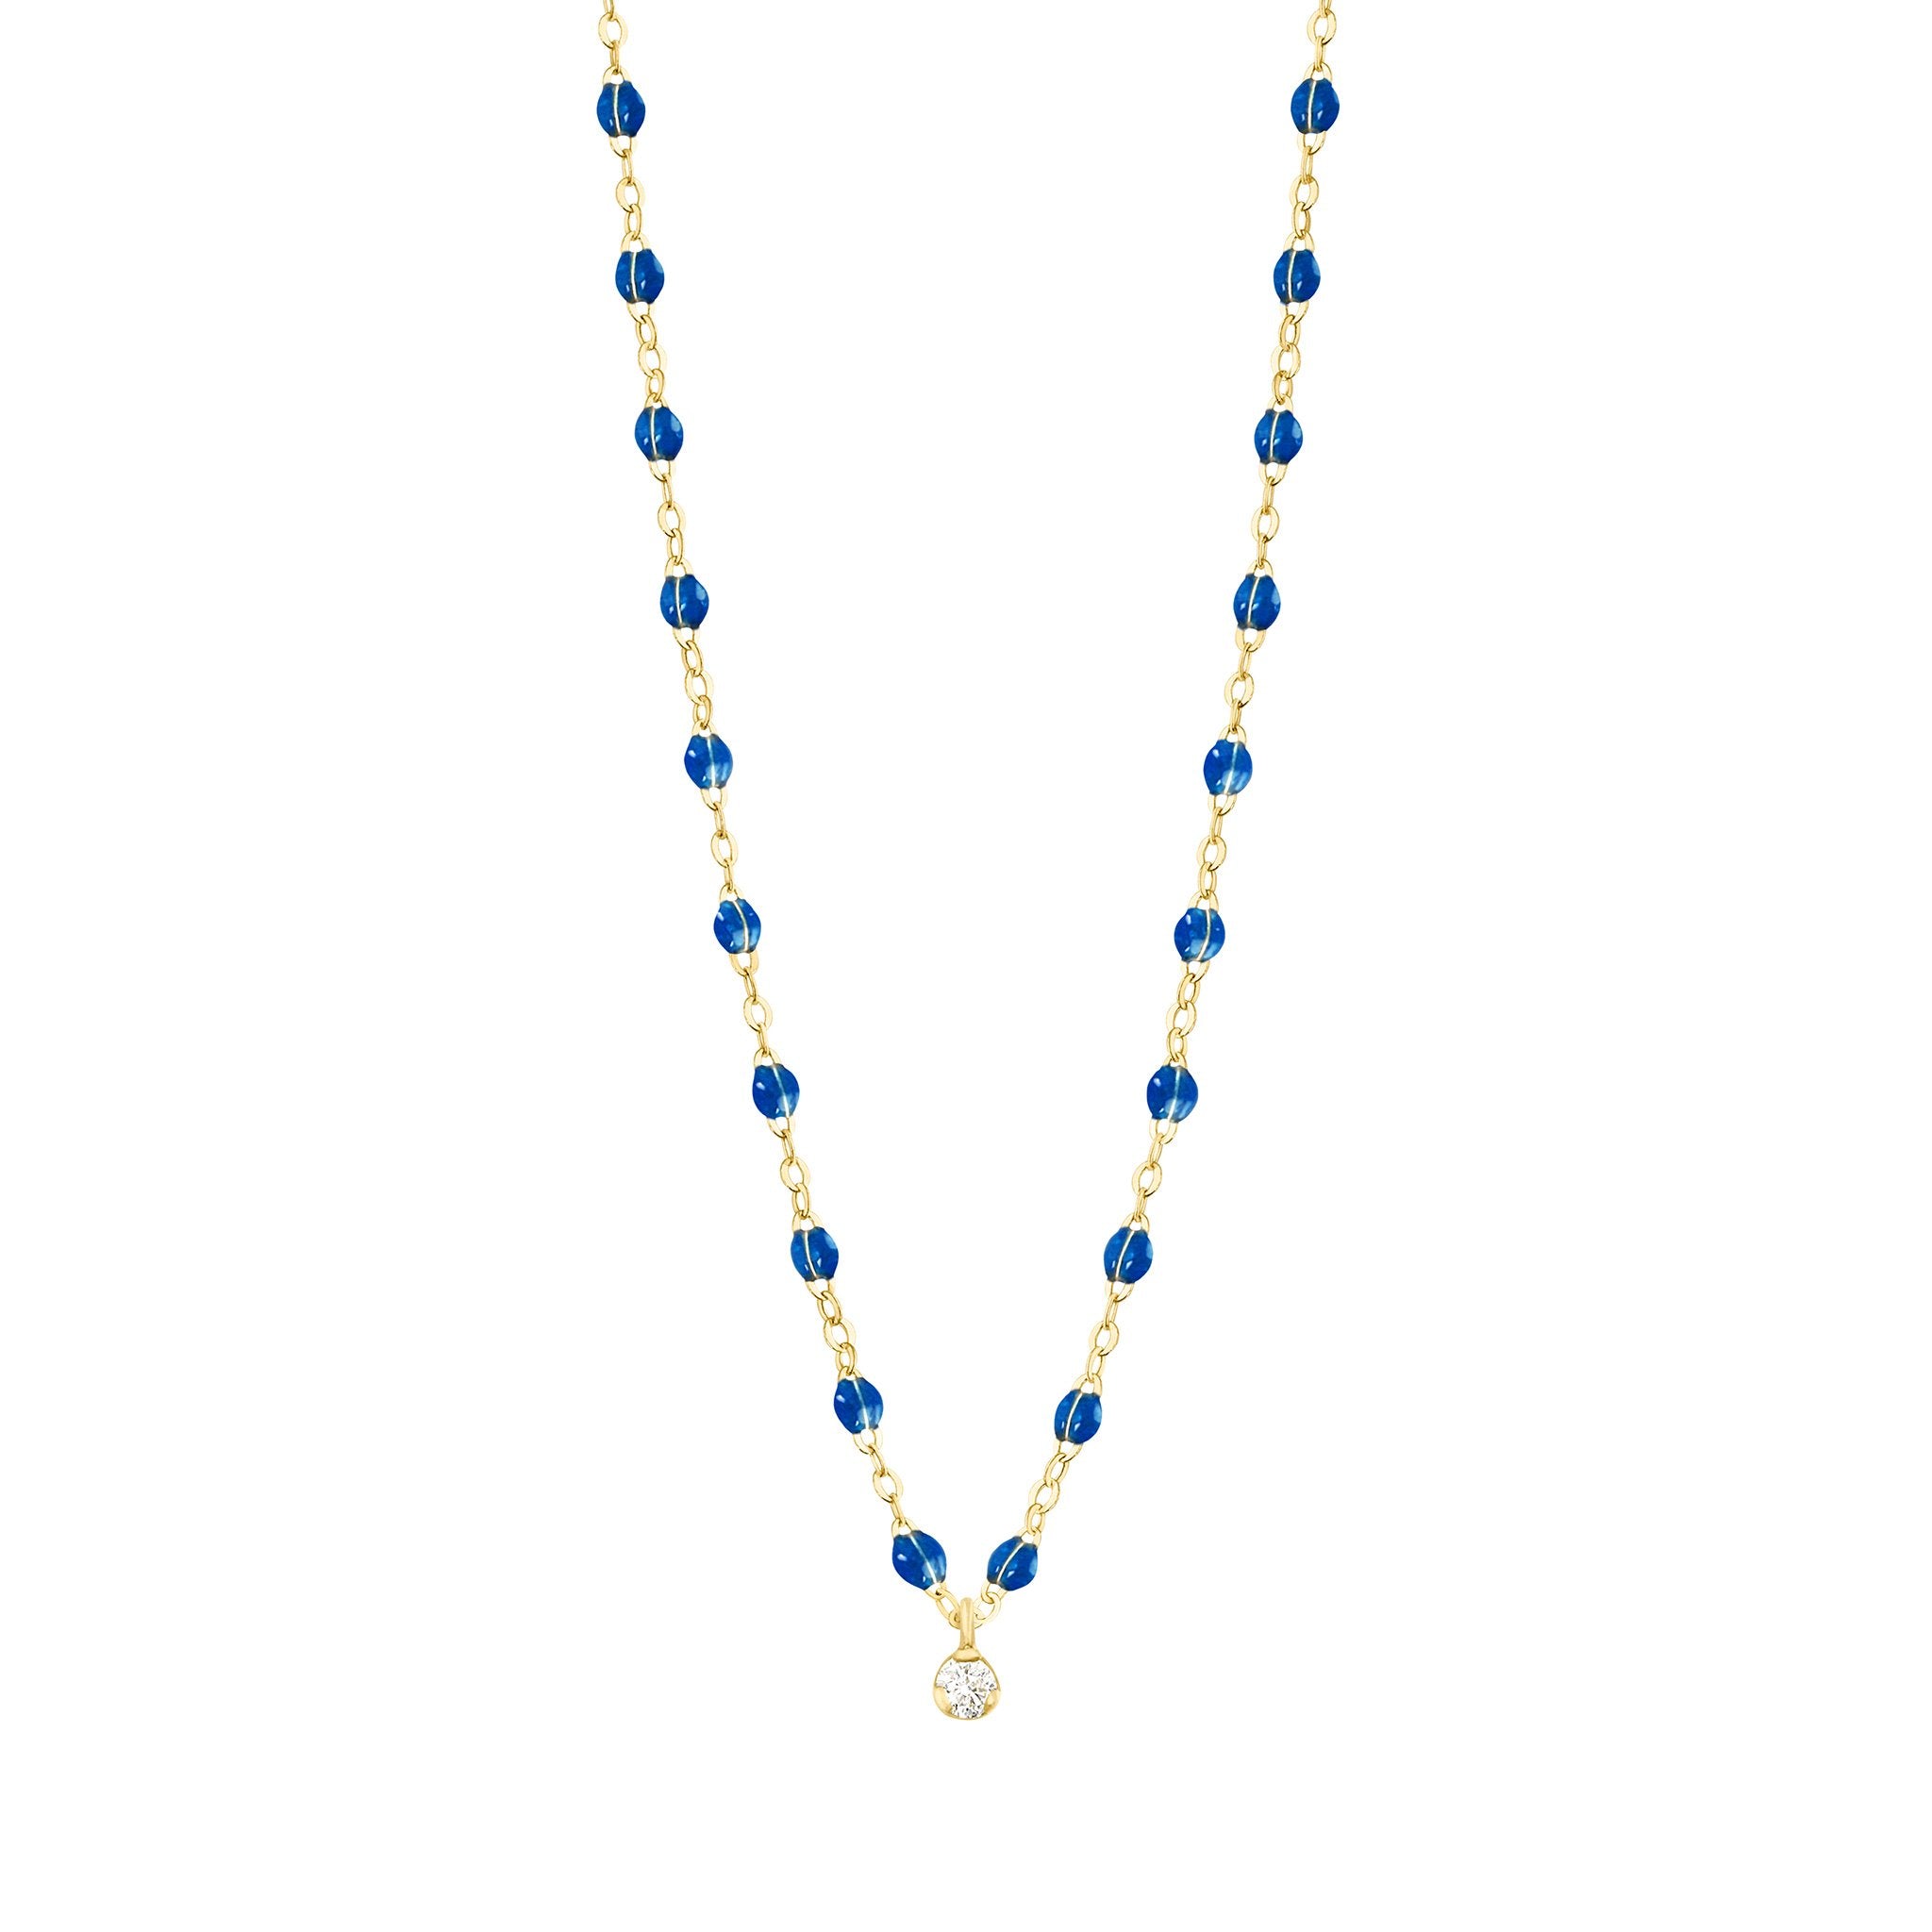 10.00 Carat Sapphire Y-Necklace in 14kt Yellow Gold | Ross-Simons